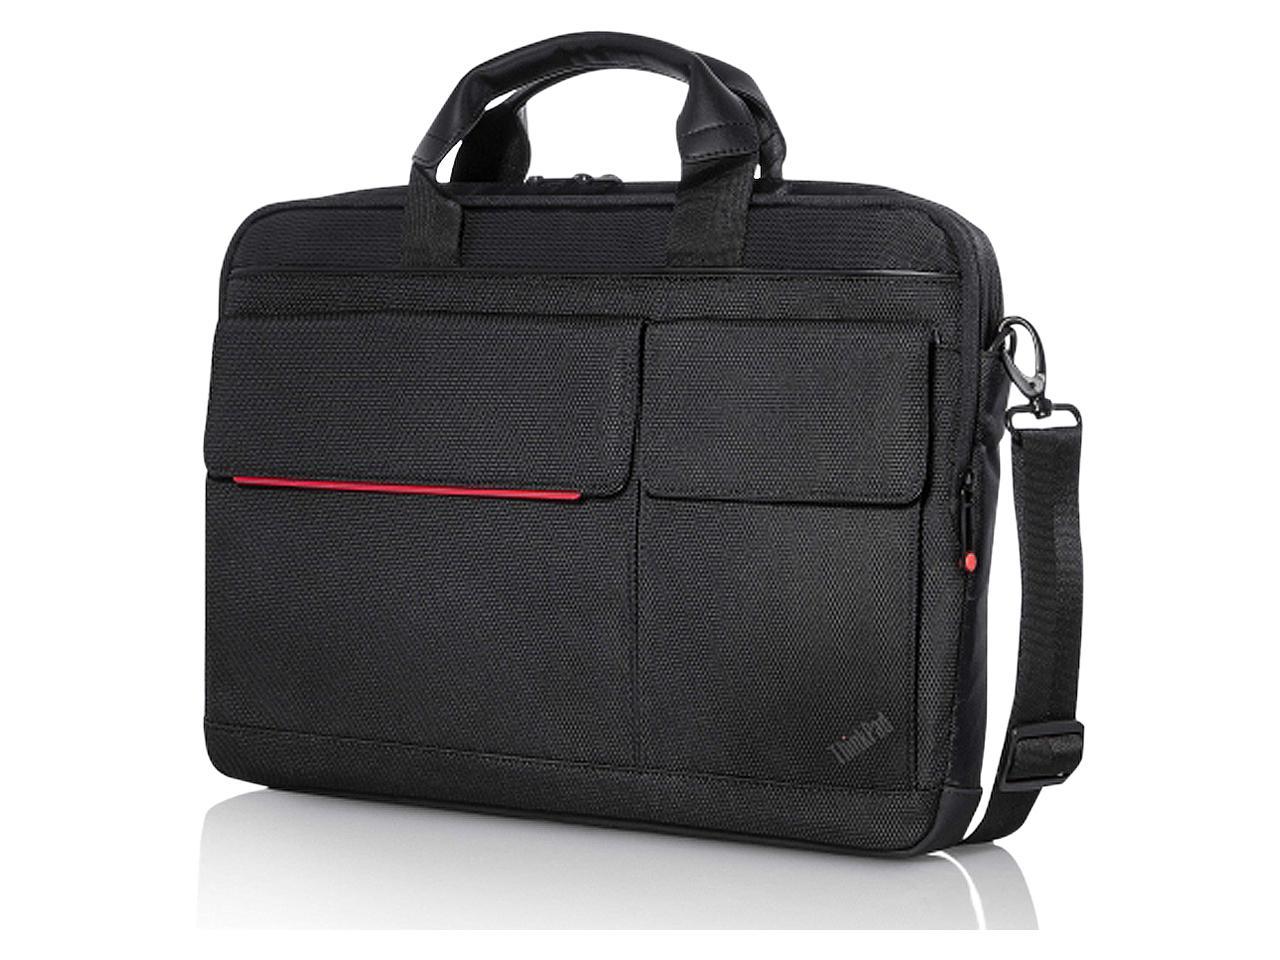 Lenovo PROFESSIONAL Carrying Case (Briefcase) for 15.6" Notebook